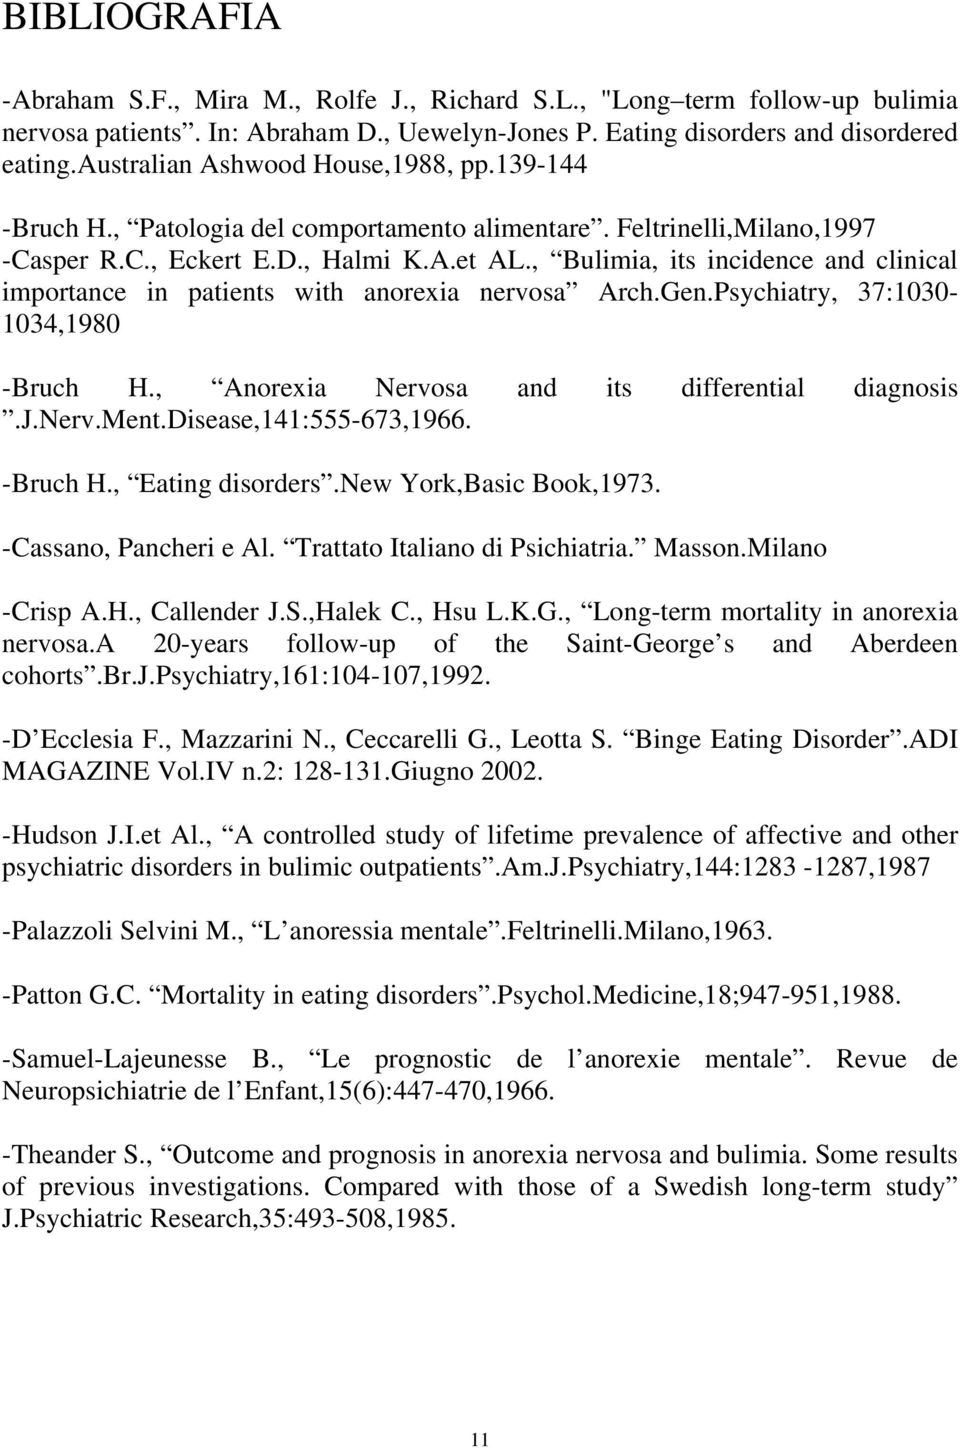 , Bulimia, its incidence and clinical importance in patients with anorexia nervosa Arch.Gen.Psychiatry, 37:1030-1034,1980 -Bruch H., Anorexia Nervosa and its differential diagnosis.j.nerv.ment.